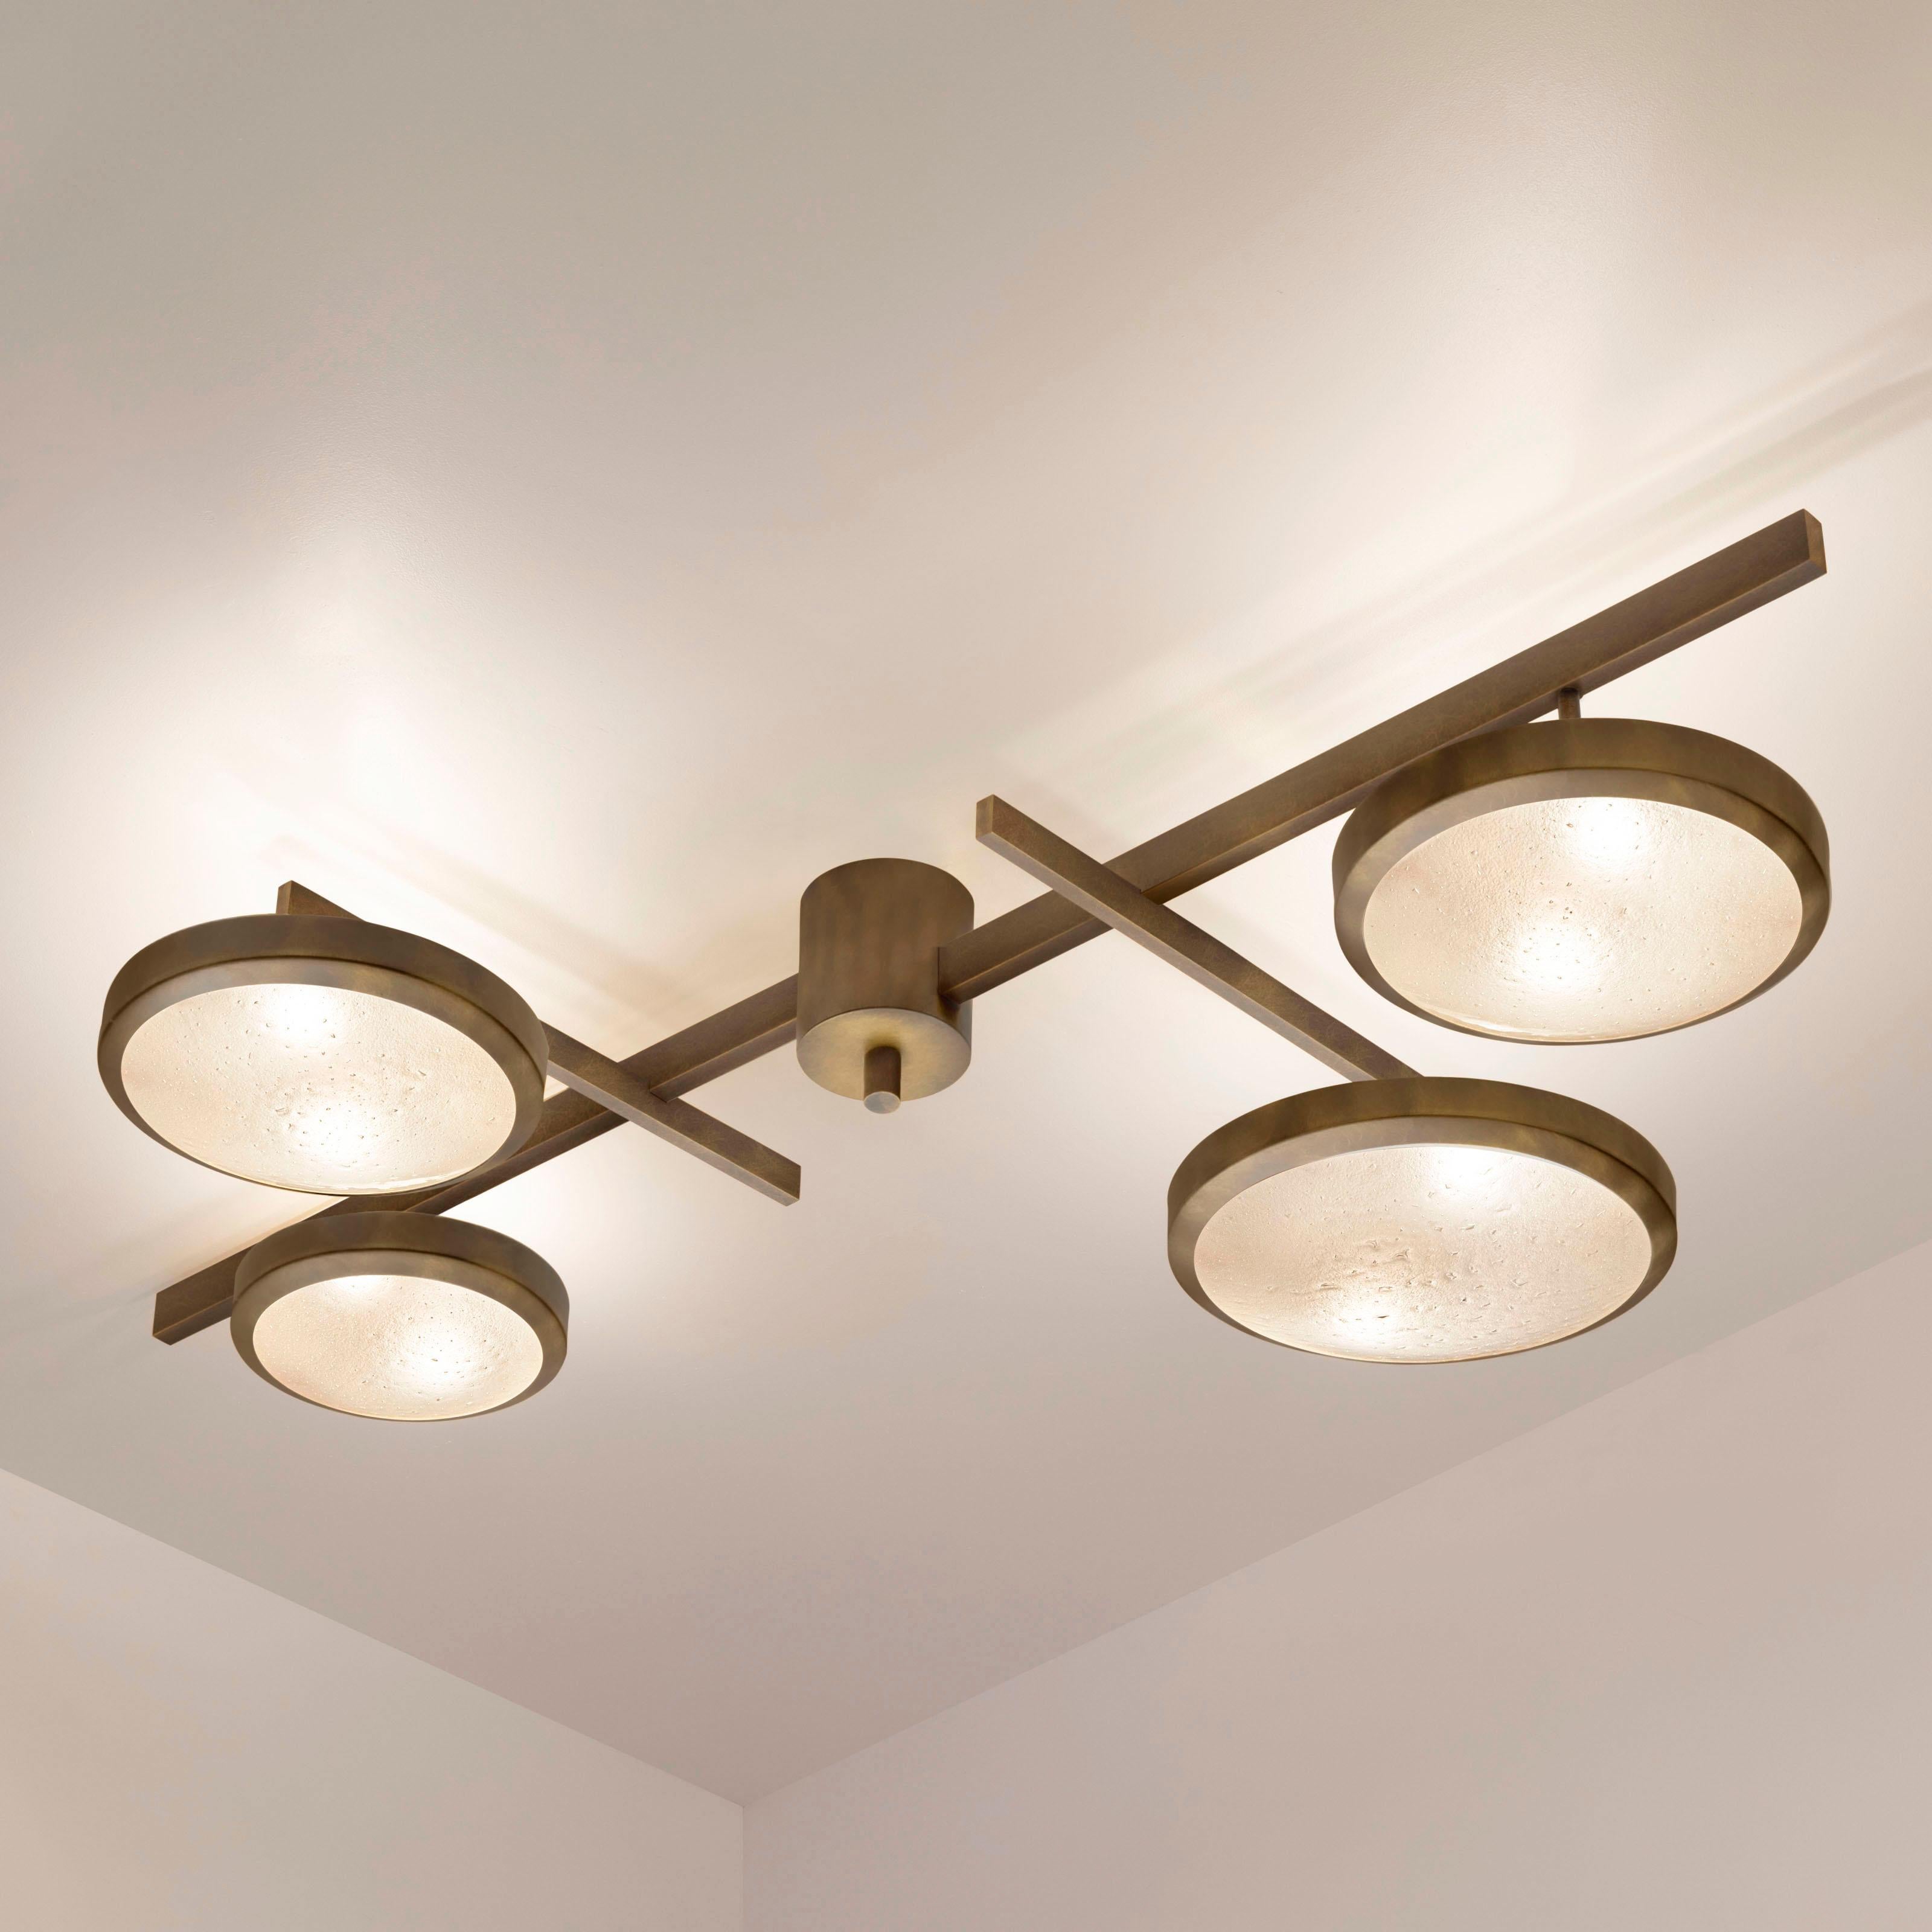 Brass Tetrix Ceiling Light by Gaspare Asaro- Satin Nickel Finish For Sale